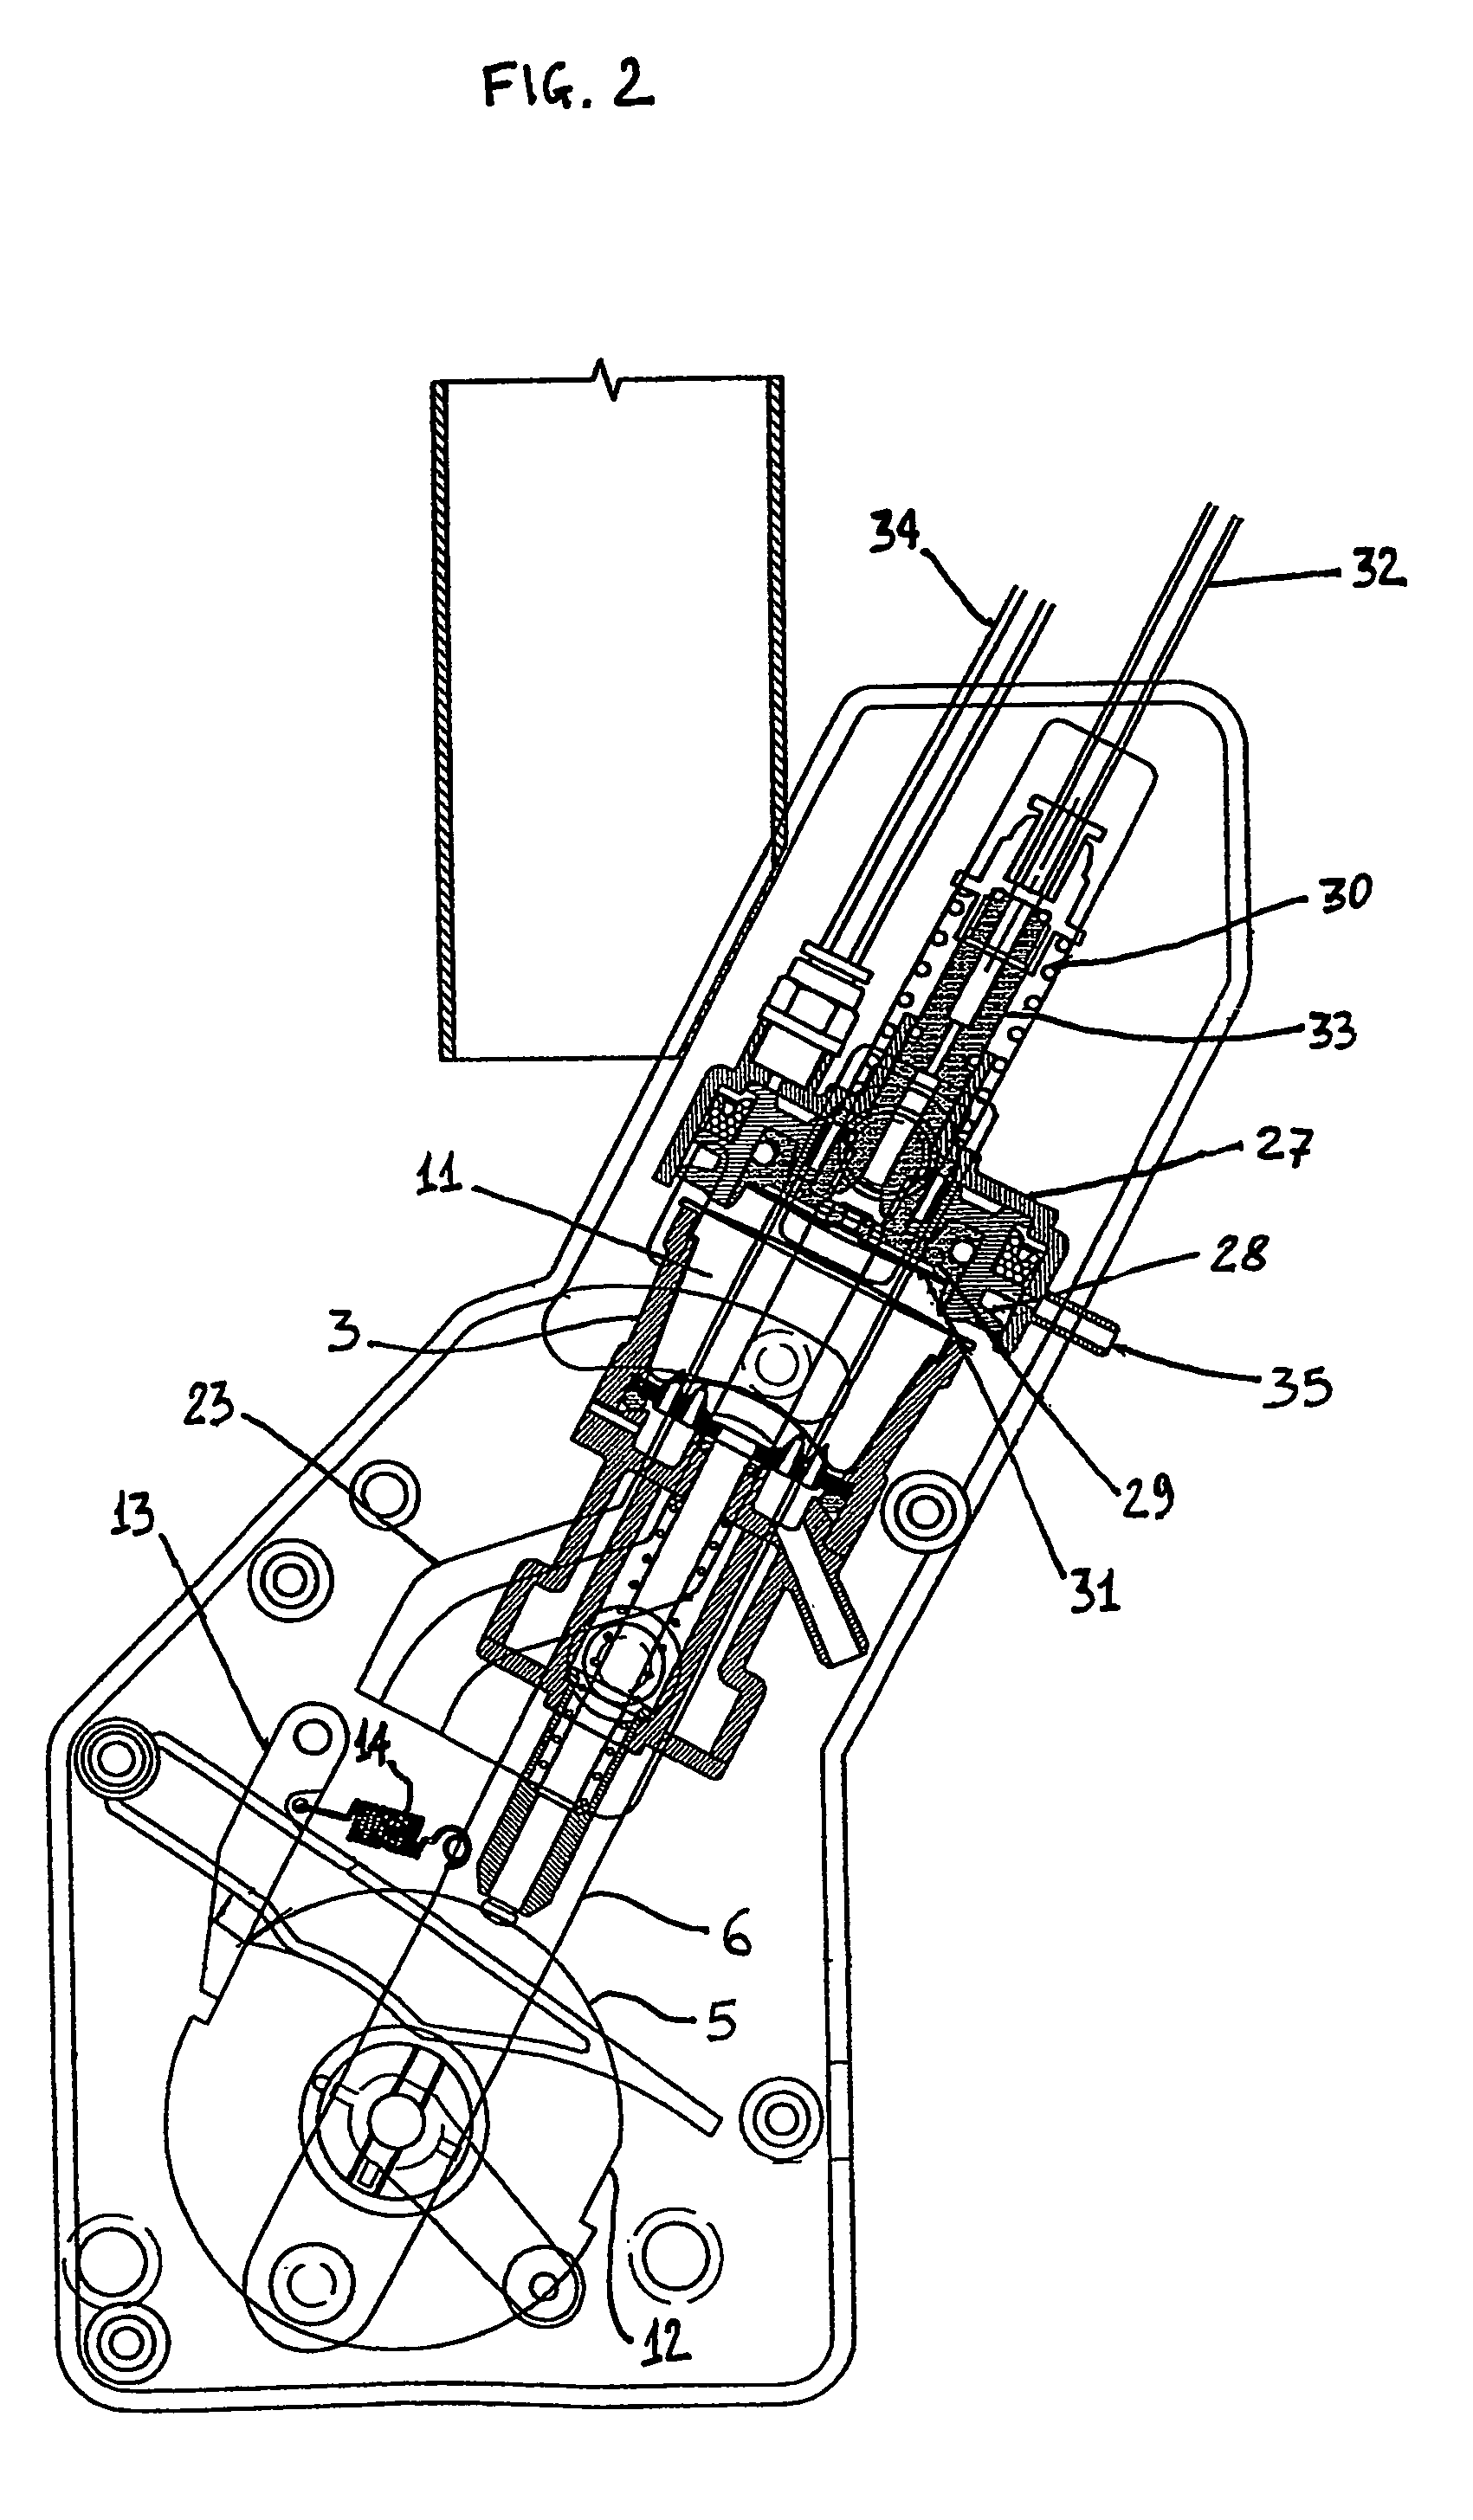 Mechanically and hydrodynamically operated brewing unit